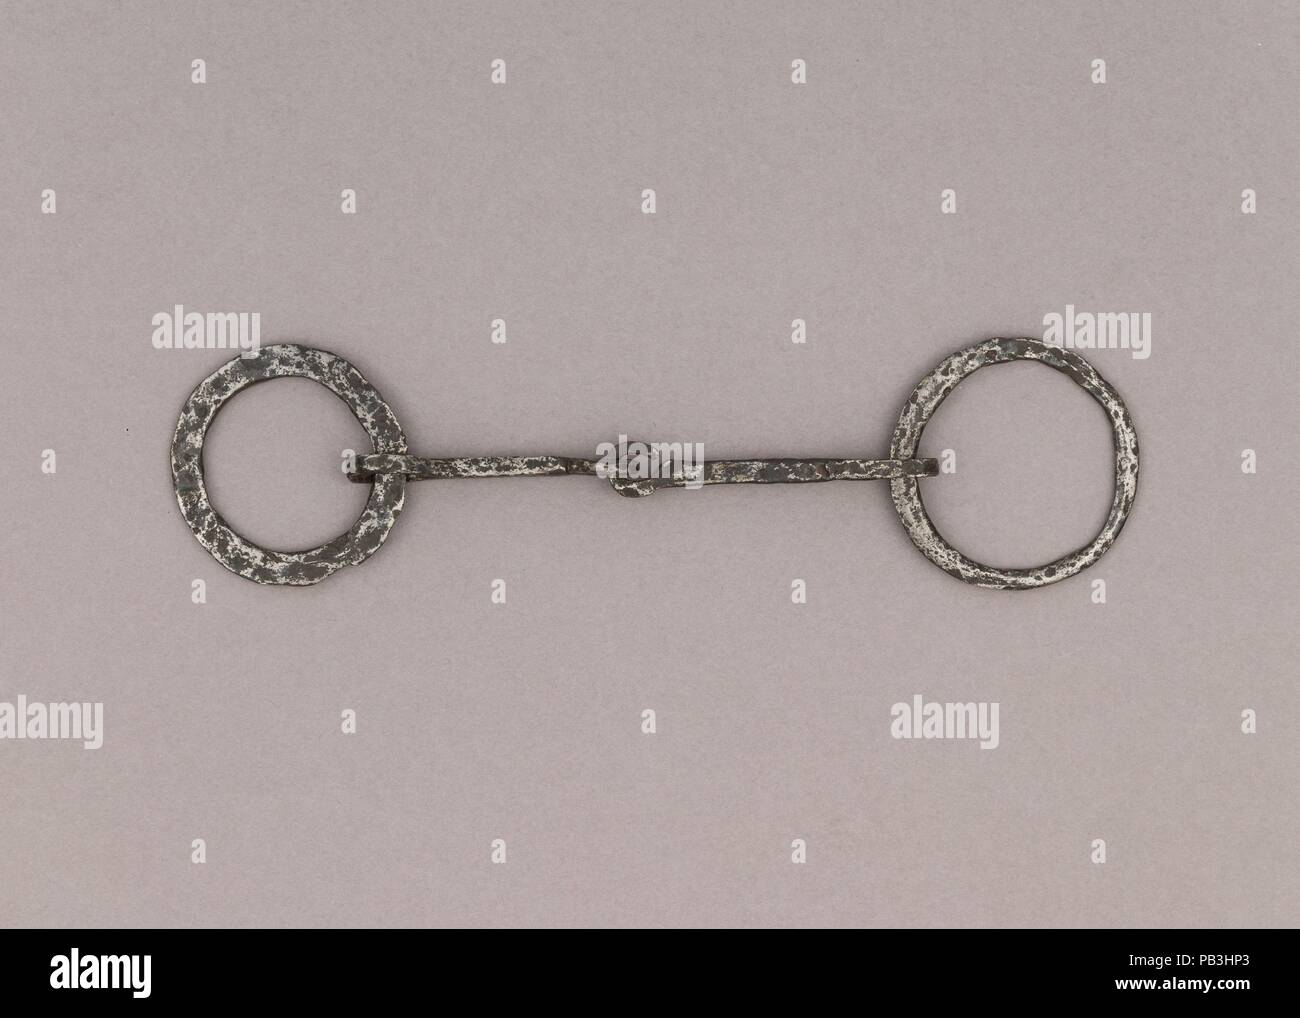 Snaffle Bit. Culture: German. Dimensions: W. 9 3/8 in. (23.8 cm); Wt. 3 oz. (85 g). Date: 9th-11th century.  If the Vikings are mostly known for being talented sailors, one may forget they were also horse riders, and as in all the Germanic cultures, horses had great importance in their society, in both its social and religious aspects. Equestrian equipment, like stirrups, spurs and bits, are regularly found in Viking burials, among the goods warriors wanted to bring with them to the afterlife. The elite would sometimes even be accompanied by sacrificed horses, a meaningful practice at that tim Stock Photo